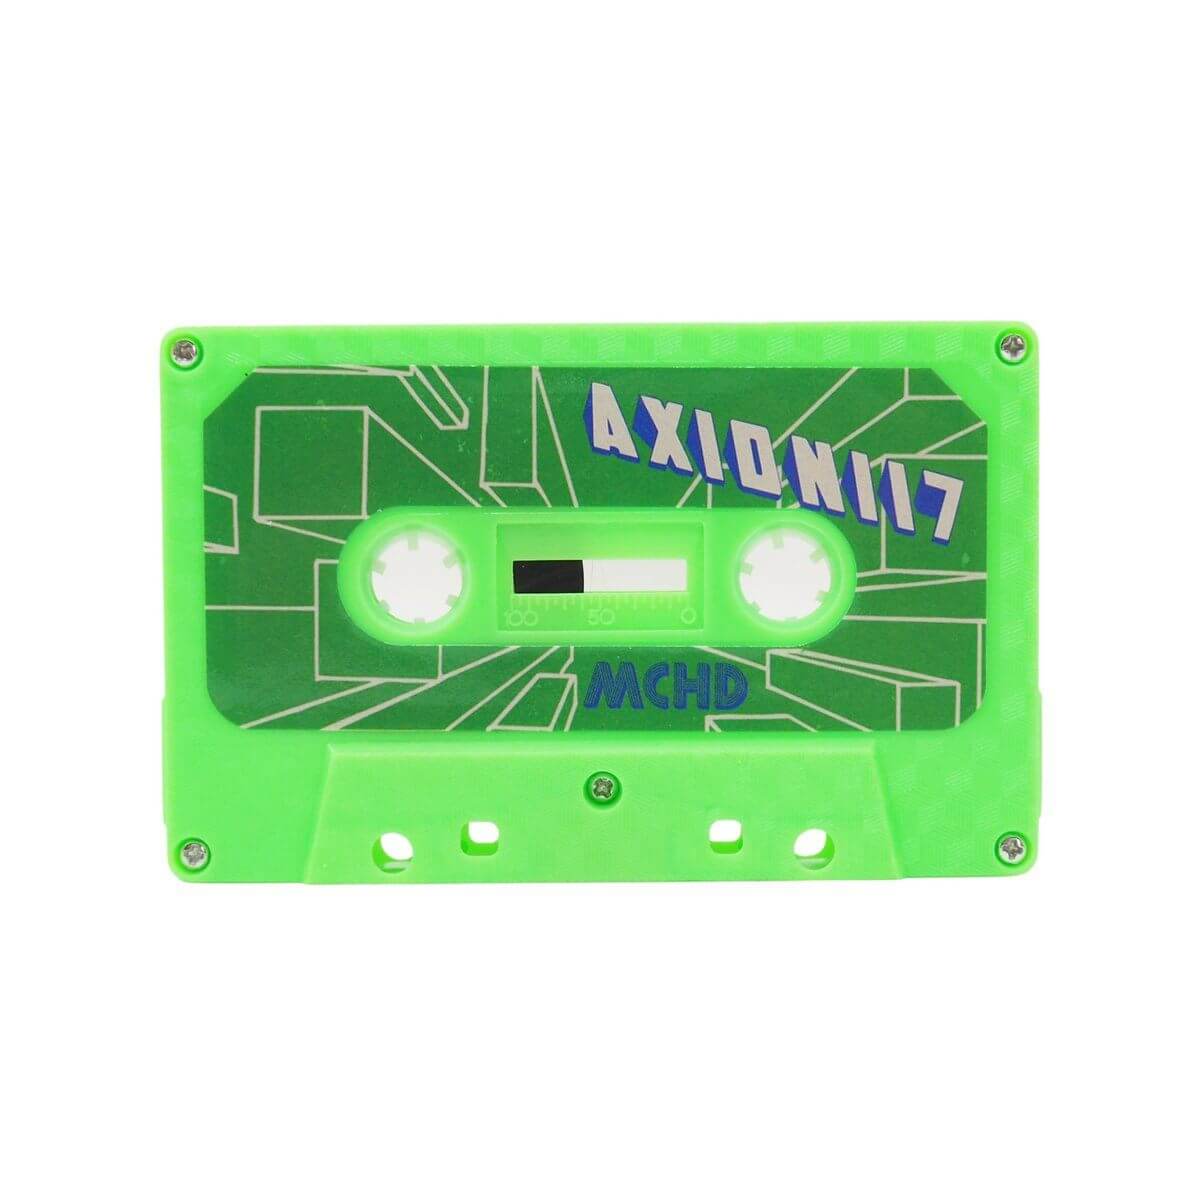 Axion117 - MCHD - Limited Edition Cassette - Cold Busted